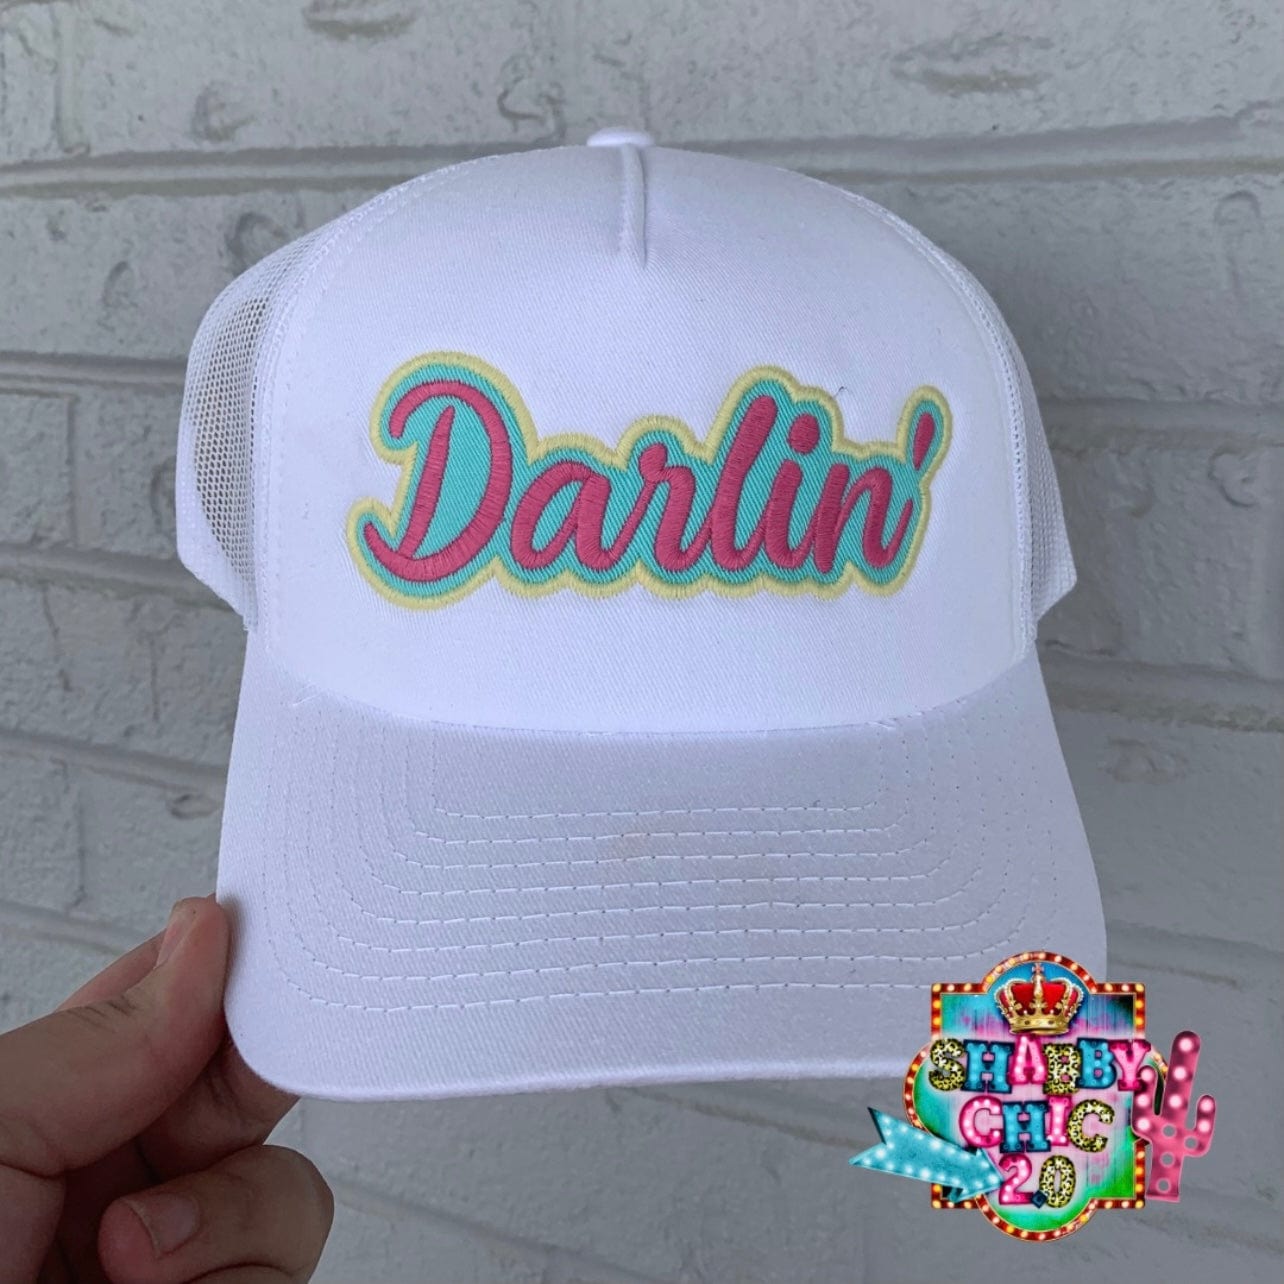 Darlin Cap Shabby Chic Boutique and Tanning Salon White